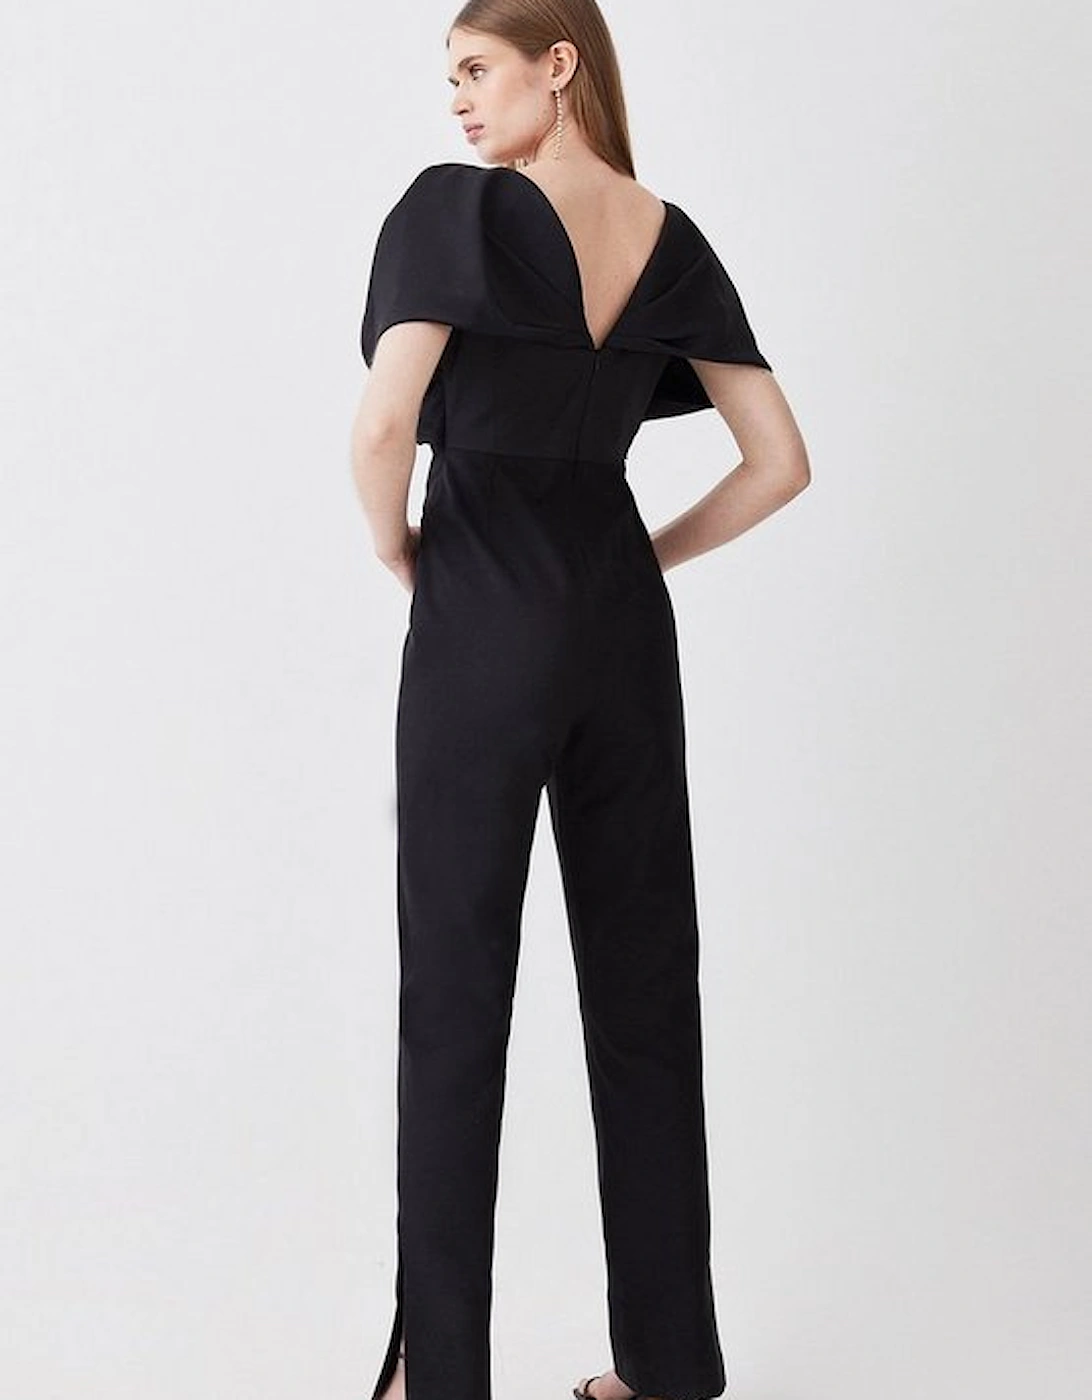 Italian Wool Blend Satin Couture Draped Jumpsuit